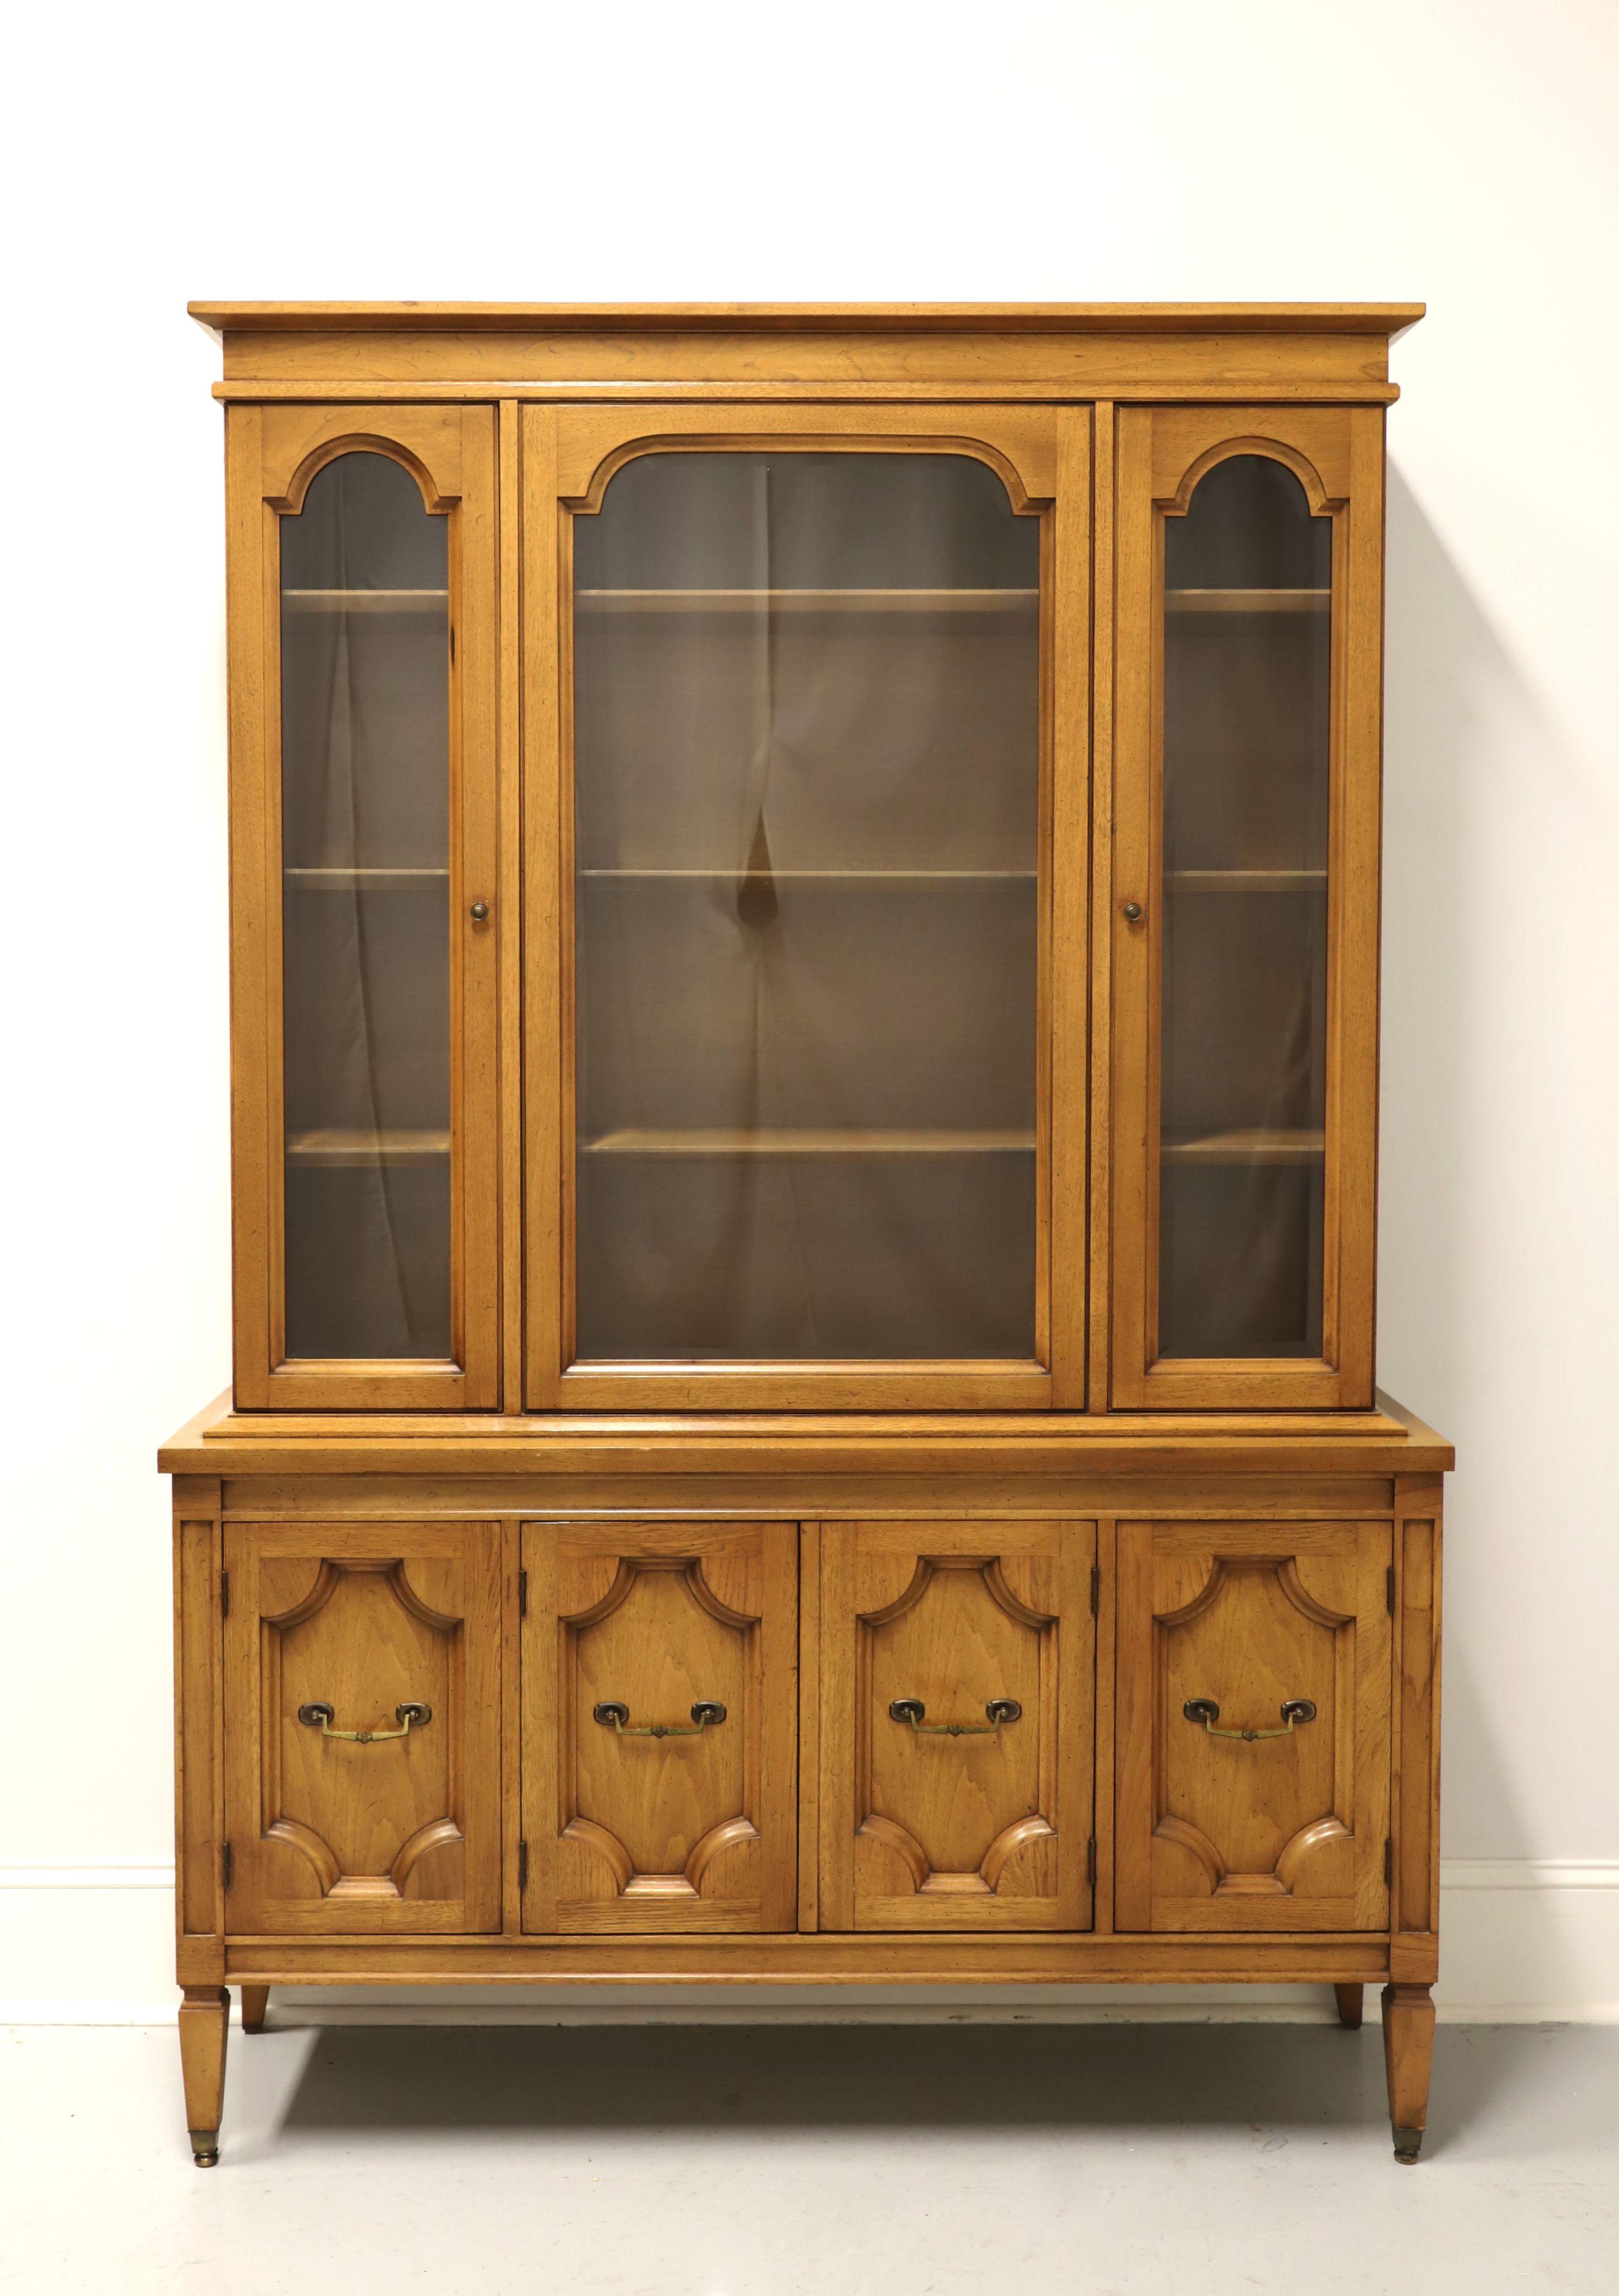 A mid 20th century Mediterranean style china cabinet by Basic Witz. Pecan, or similar nutwood, with brass hardware, crown molding to top, carved lower cabinet doors and spade feet. Upper cabinet features three fixed plate grooved wood shelves behind